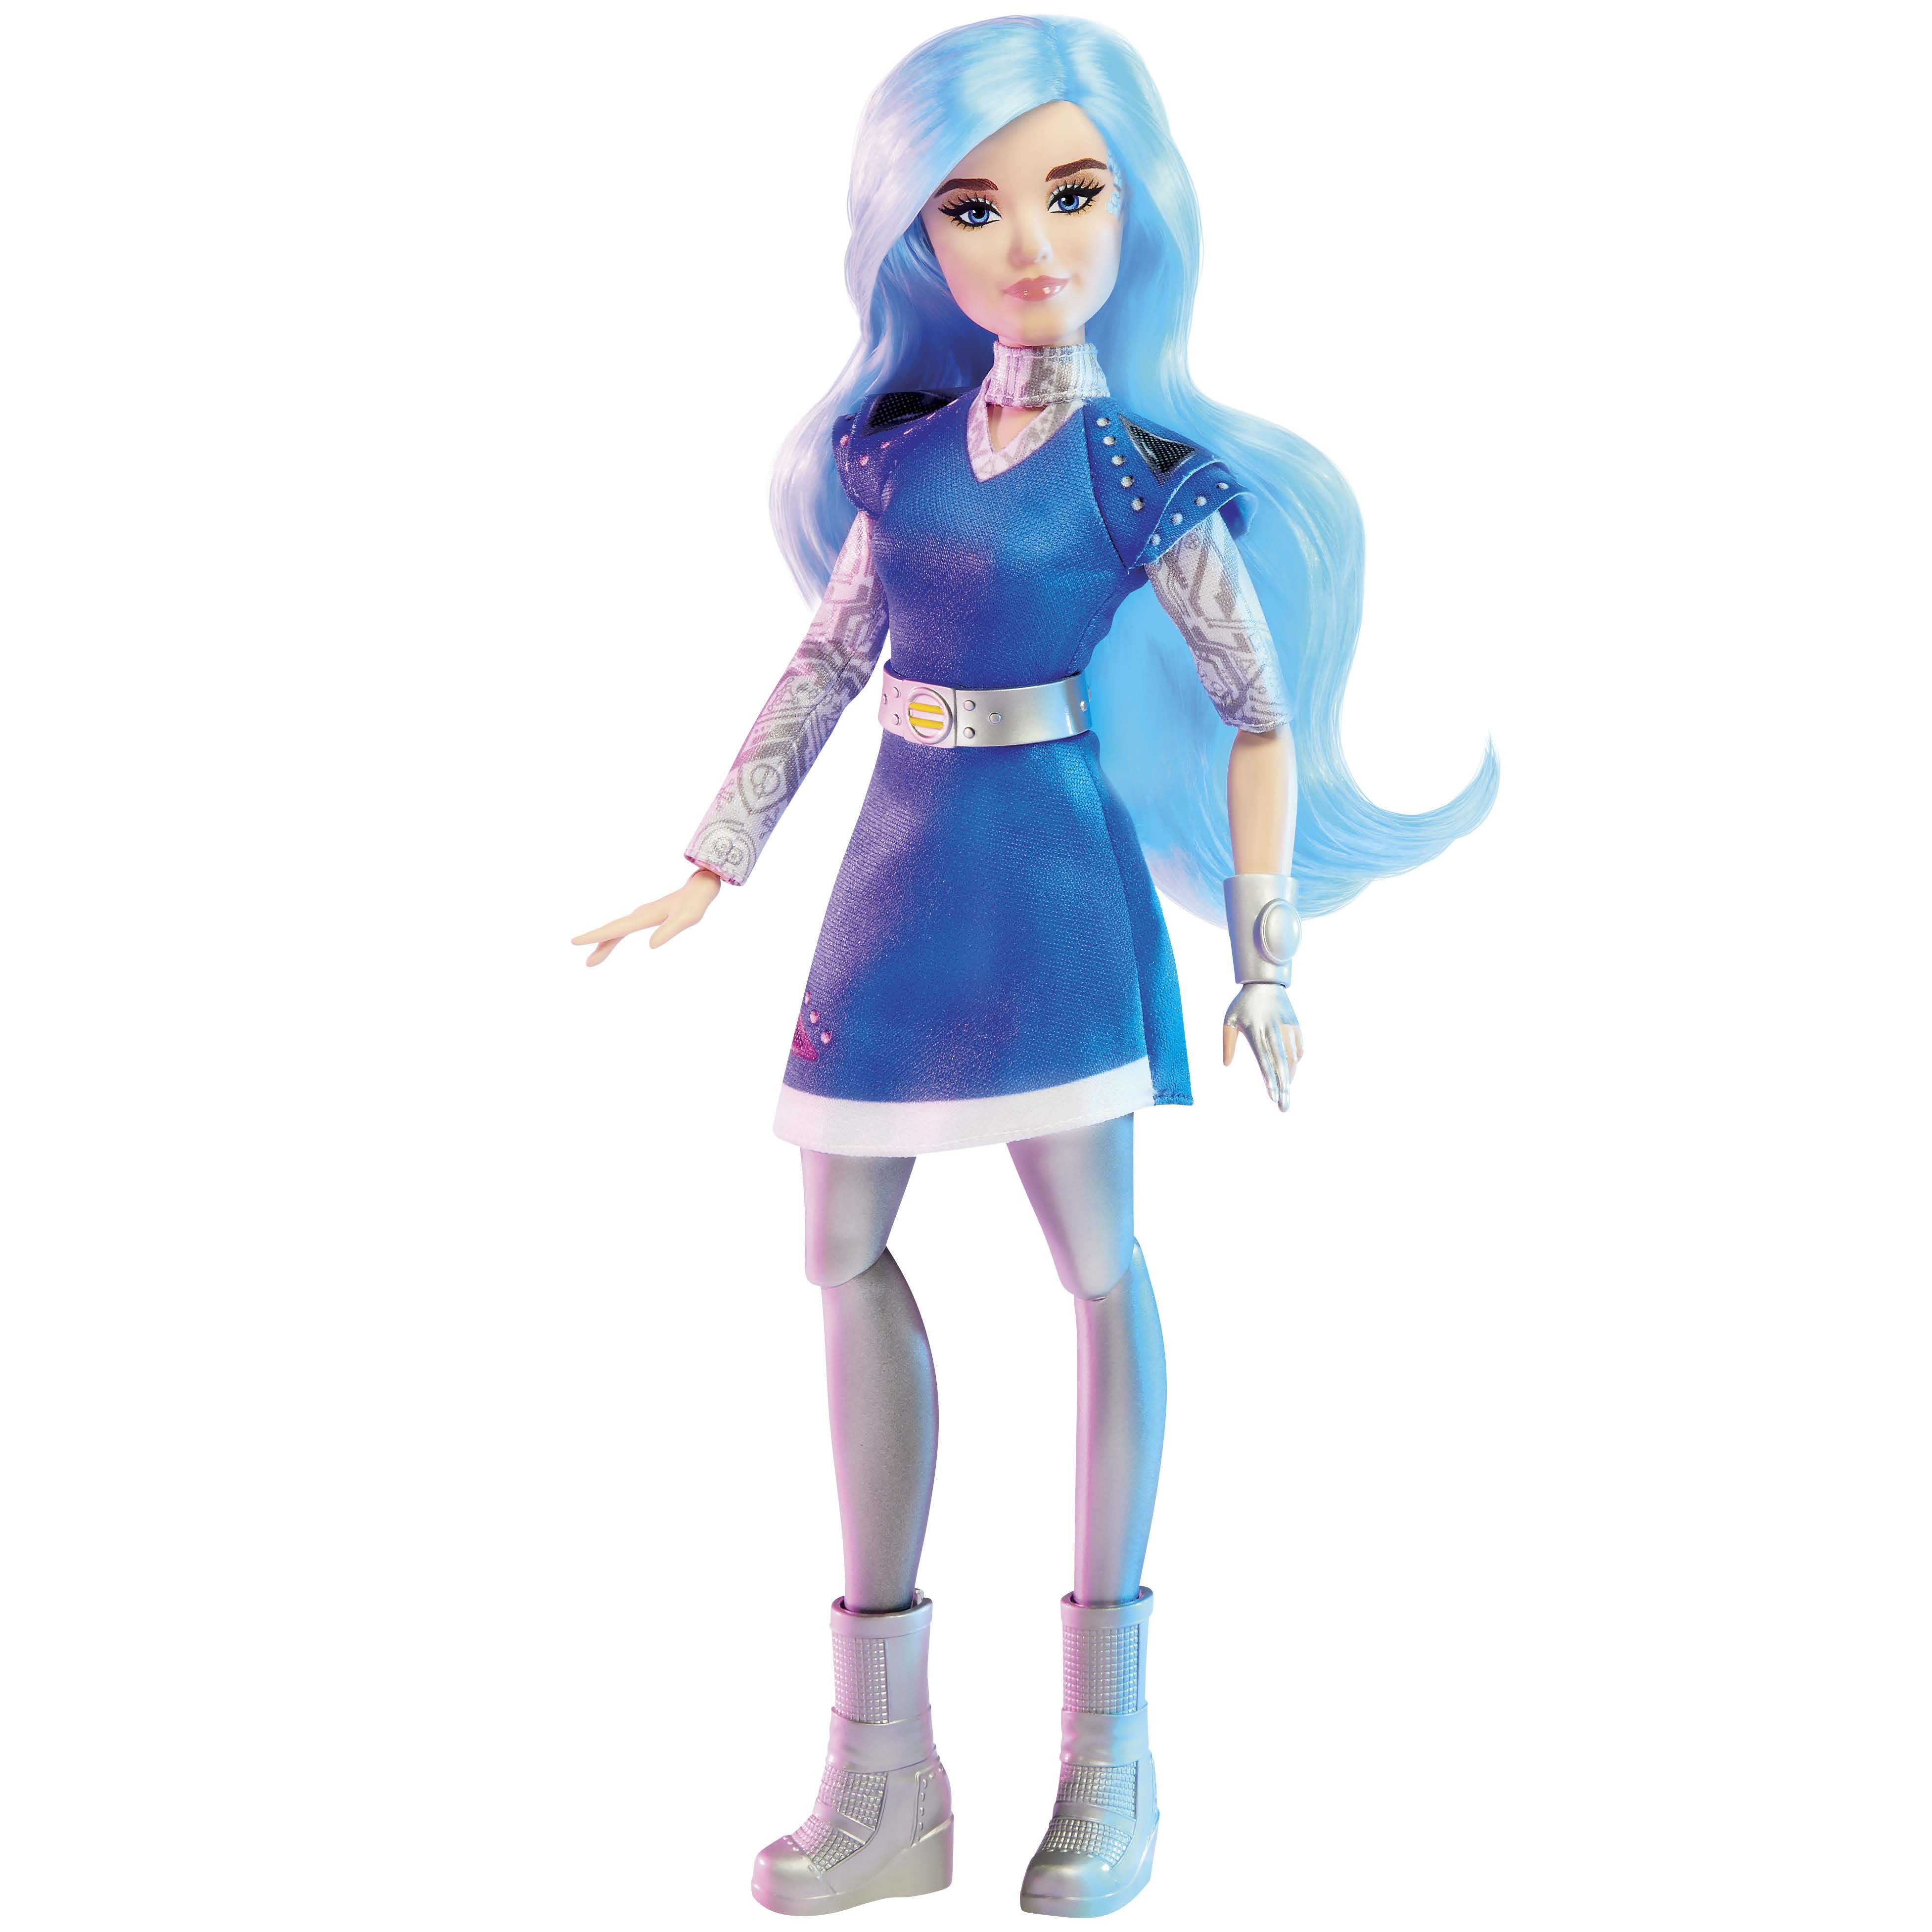 Disney Zombies A-spen Fashion Doll With Blue Hair, Alien Outfit, And ...